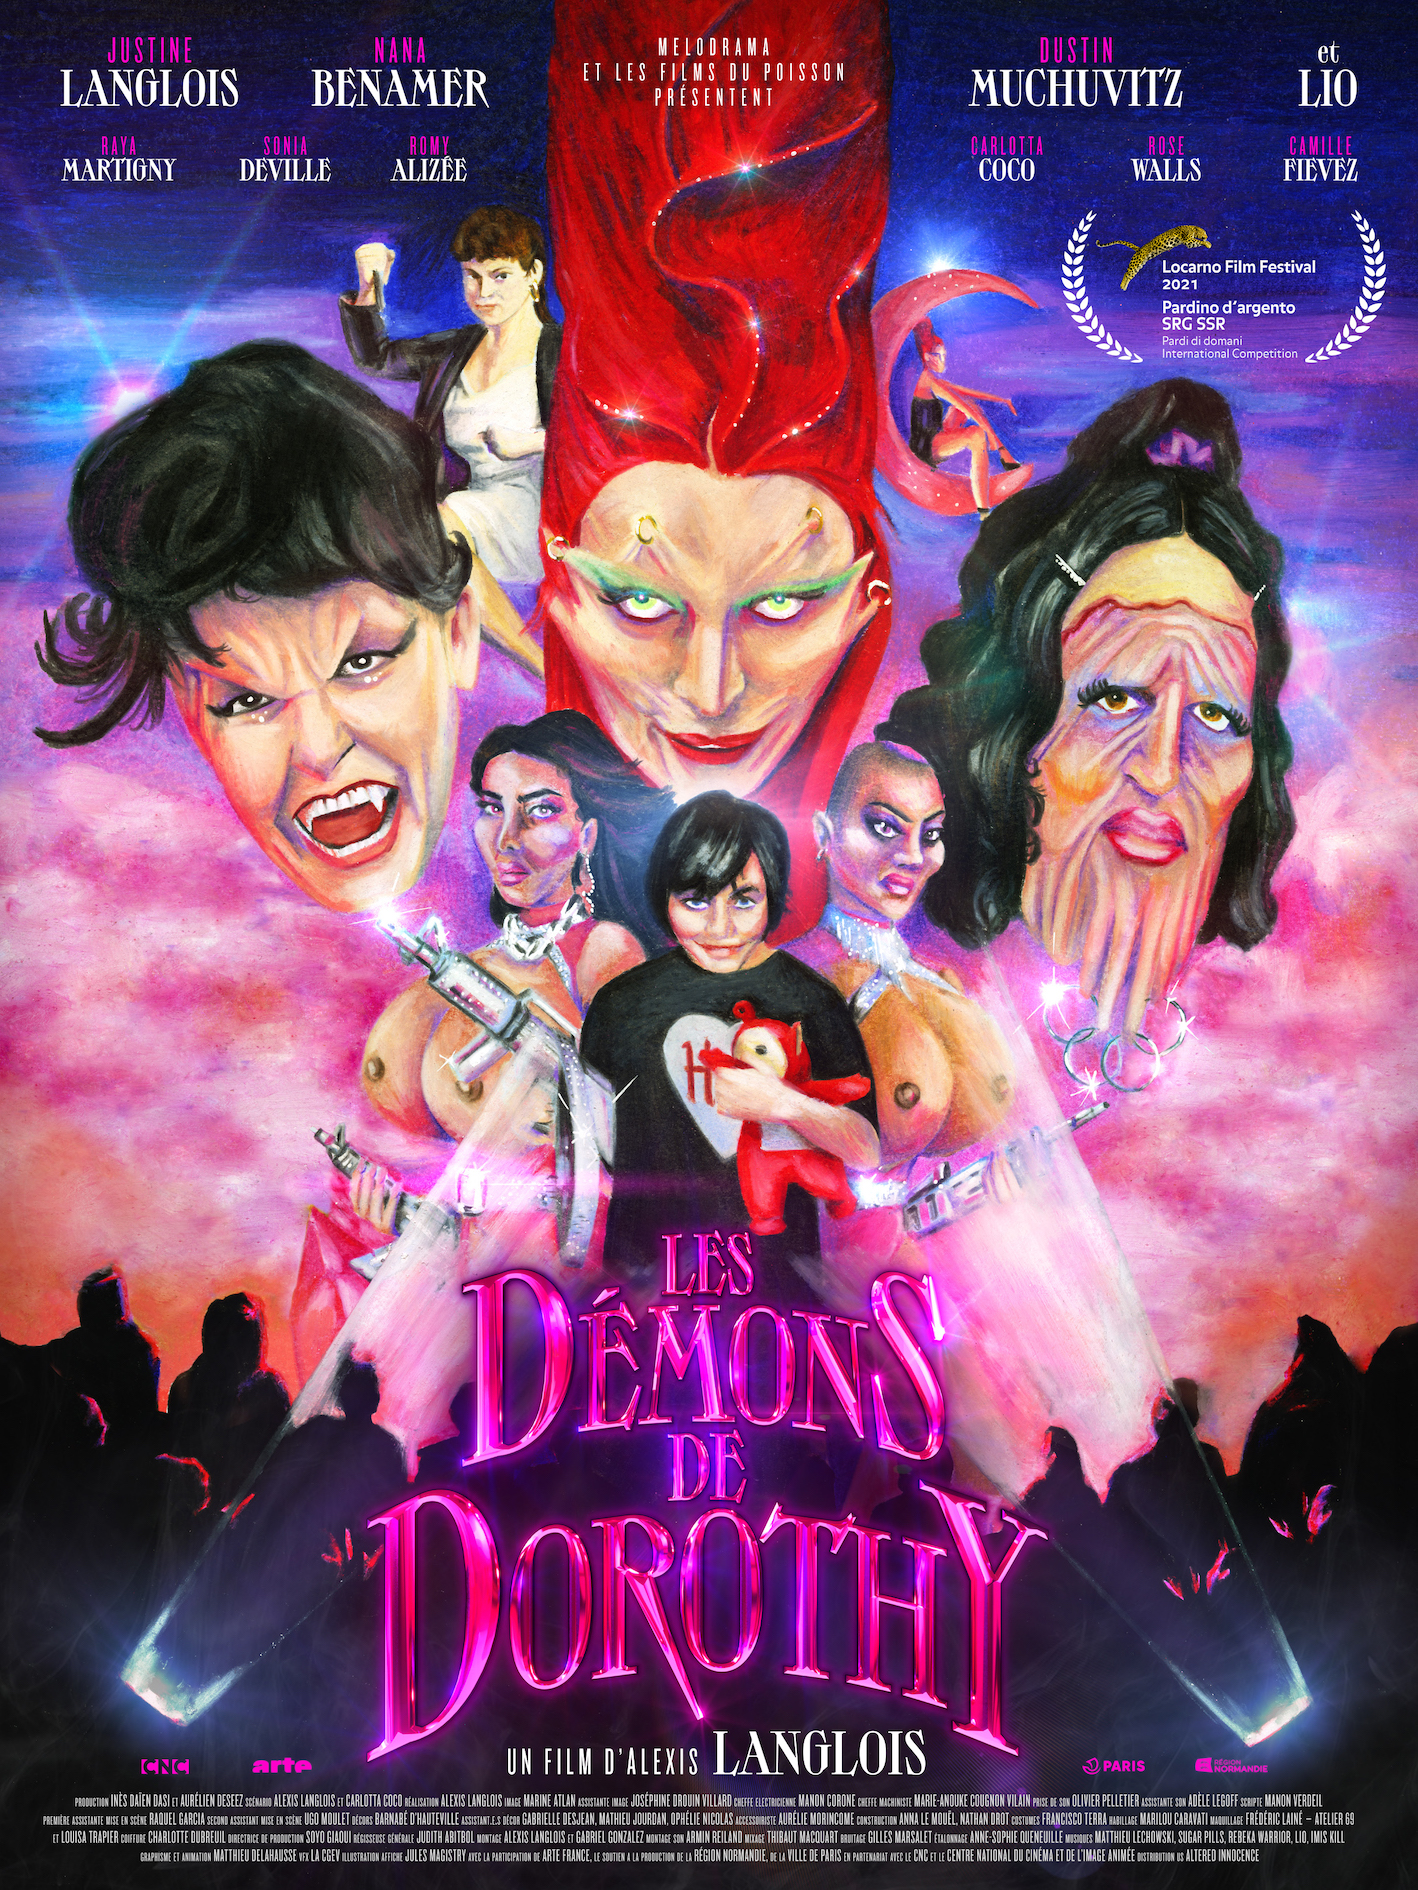 Les Demons Des Dorothy: On Reclaiming Horror From The Male Gaze